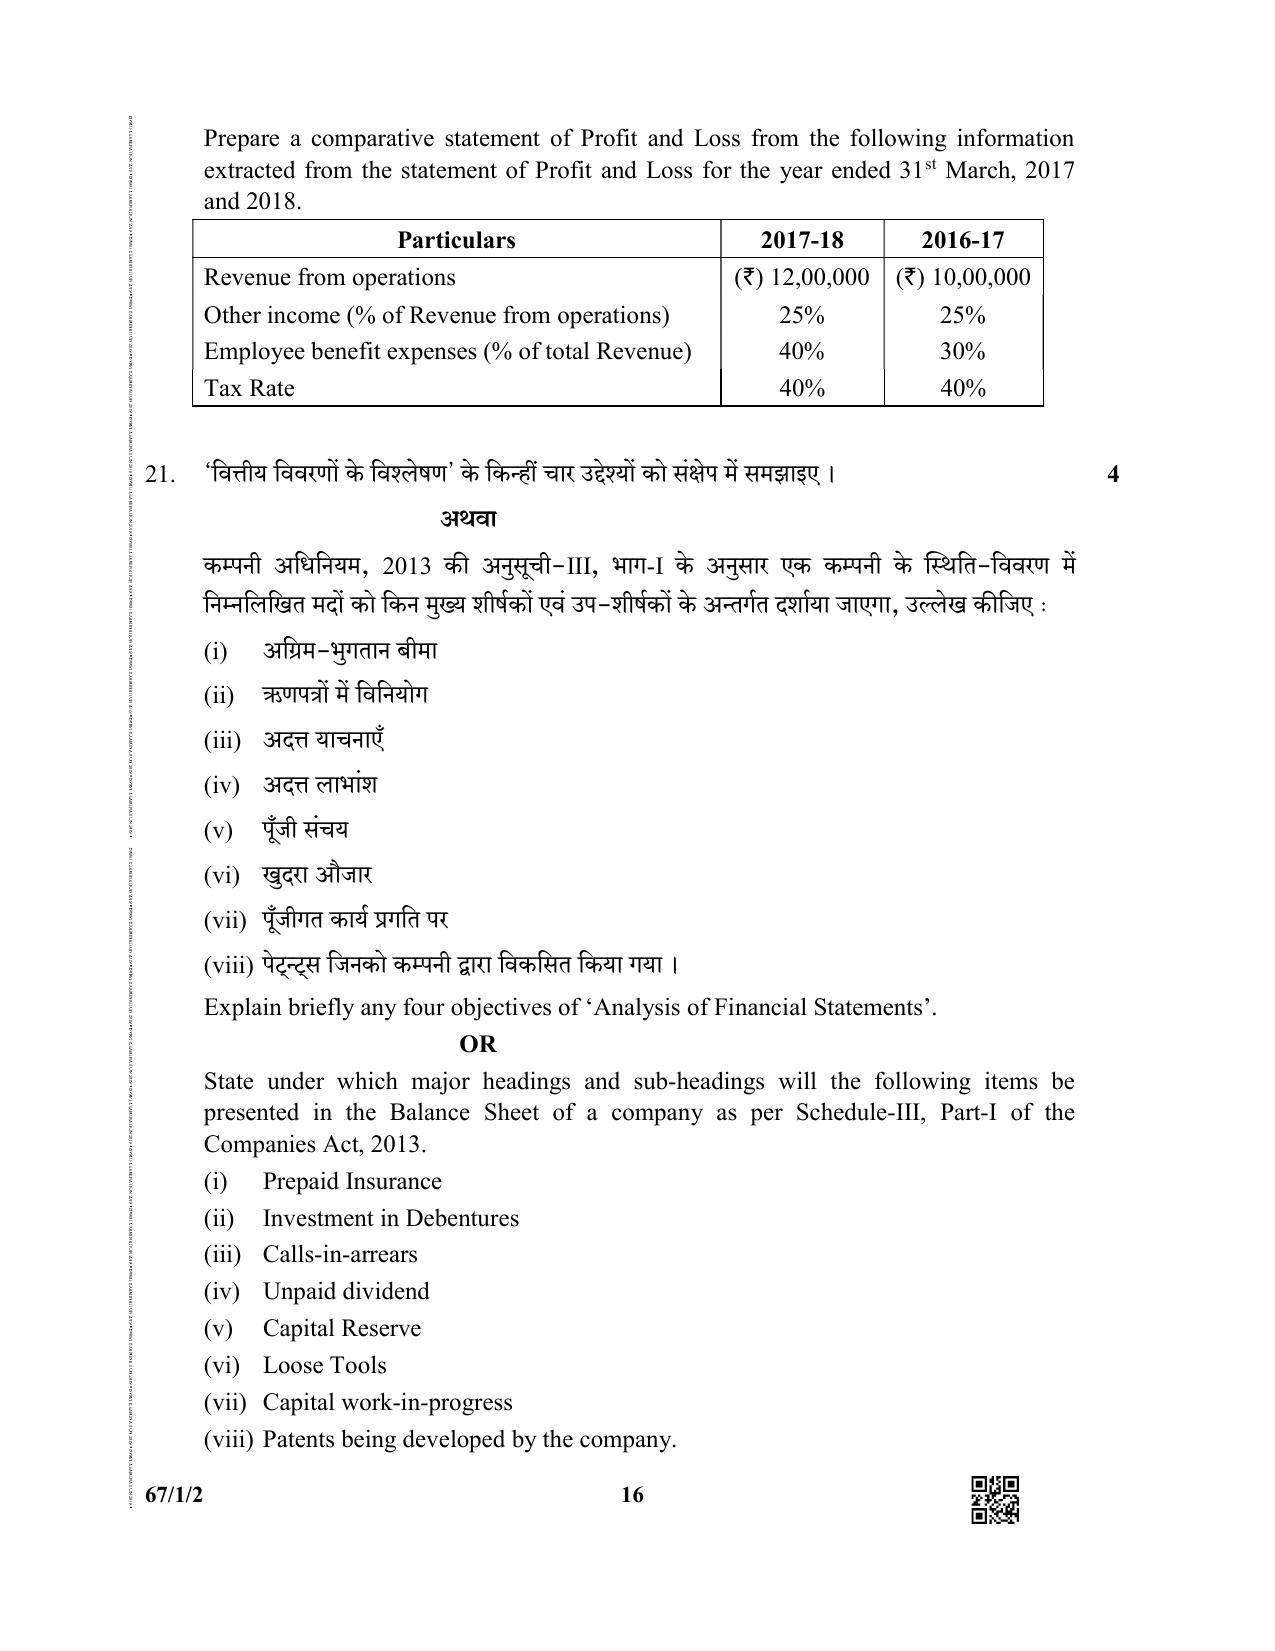 CBSE Class 12 67-1-2  (Accountancy) 2019 Question Paper - Page 16